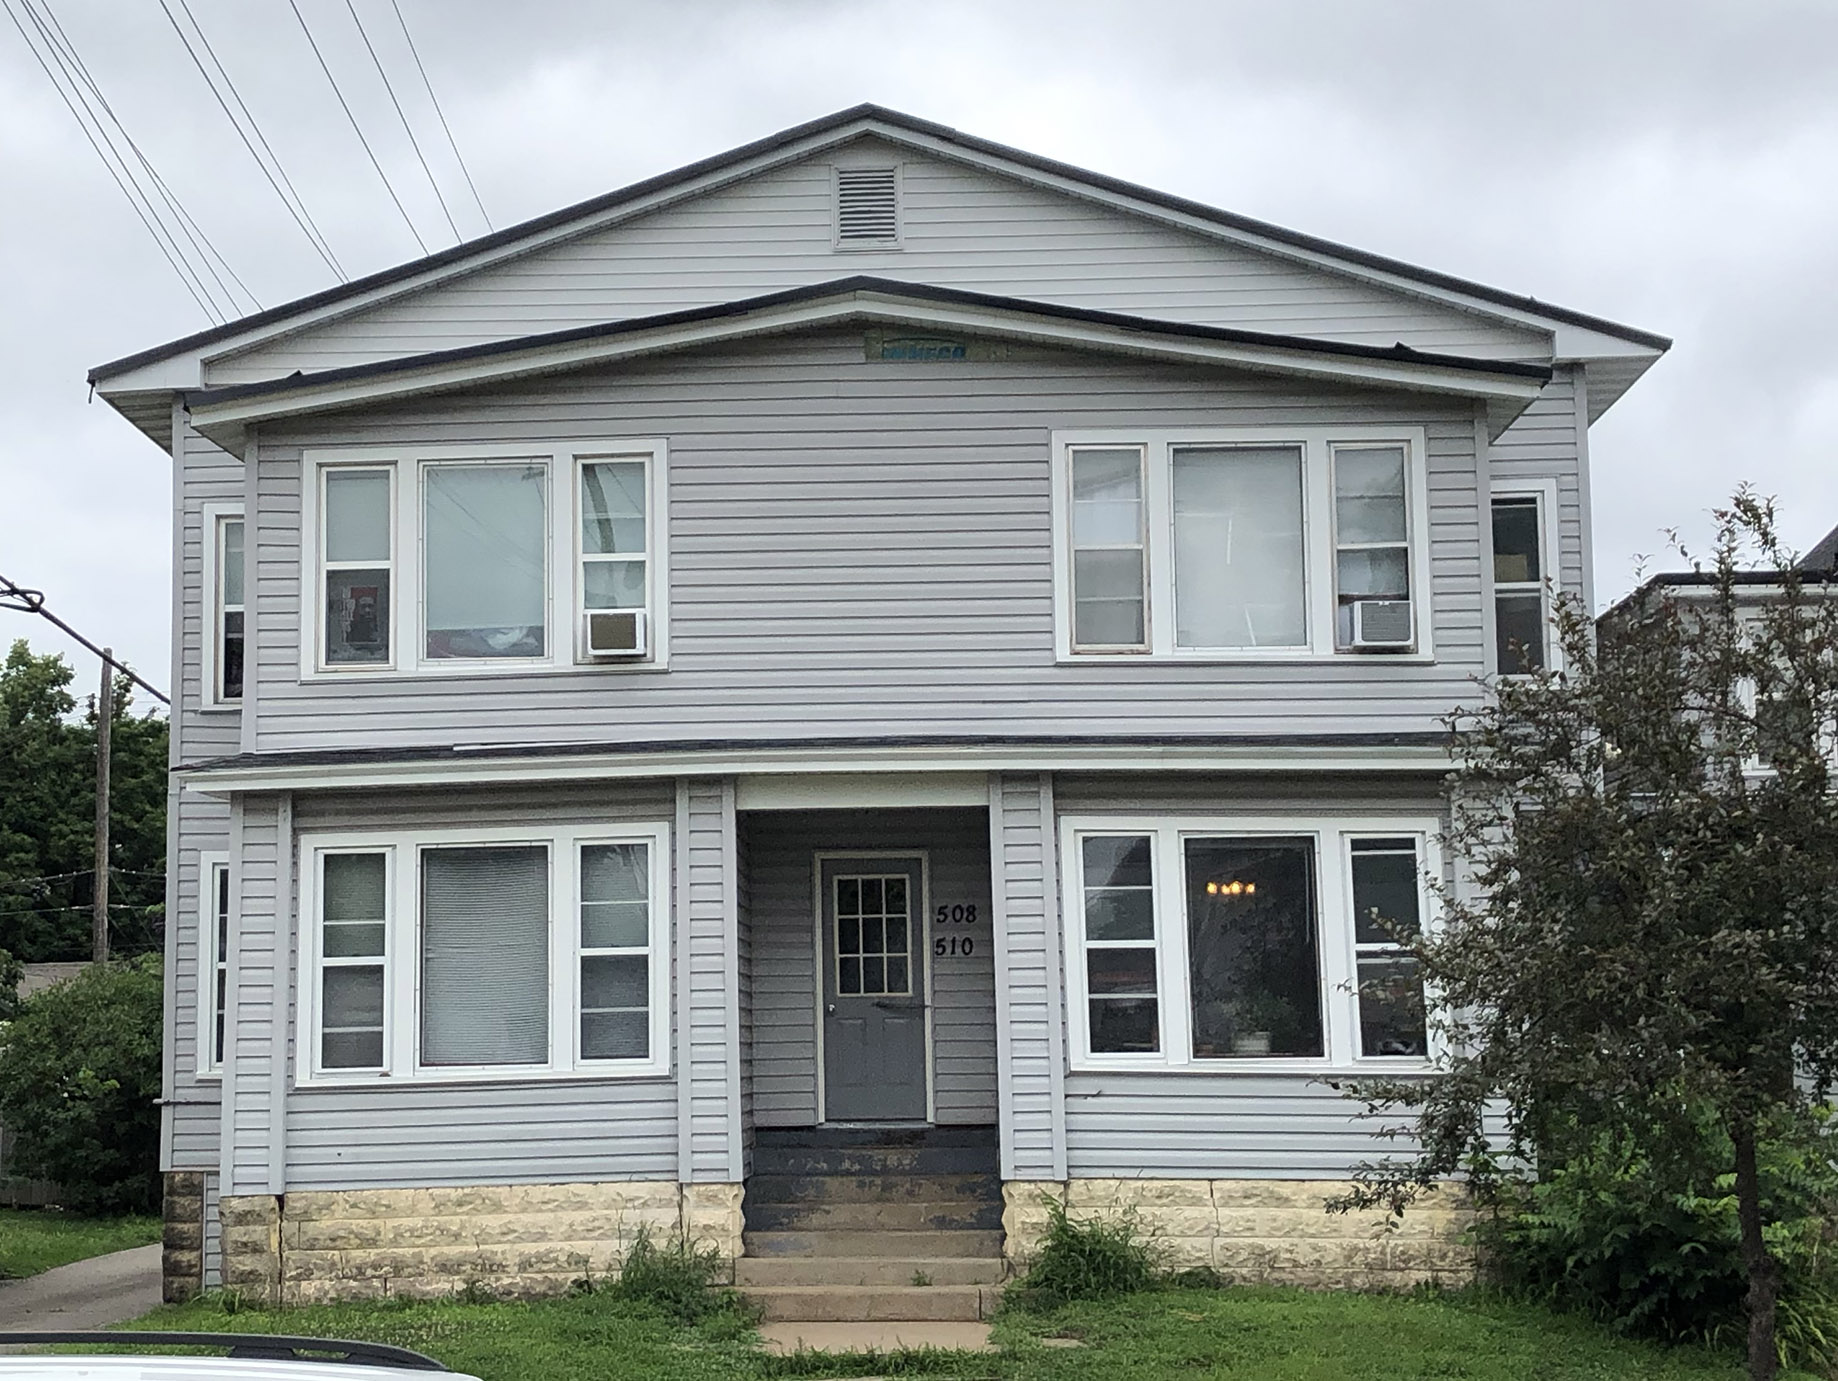 508 West Grand Ave, Eau Claire, Wisconsin 54703, 1 Bedroom Bedrooms, ,1 BathroomBathrooms,Multi-Family,Apartment,508 West Grand Ave,1119